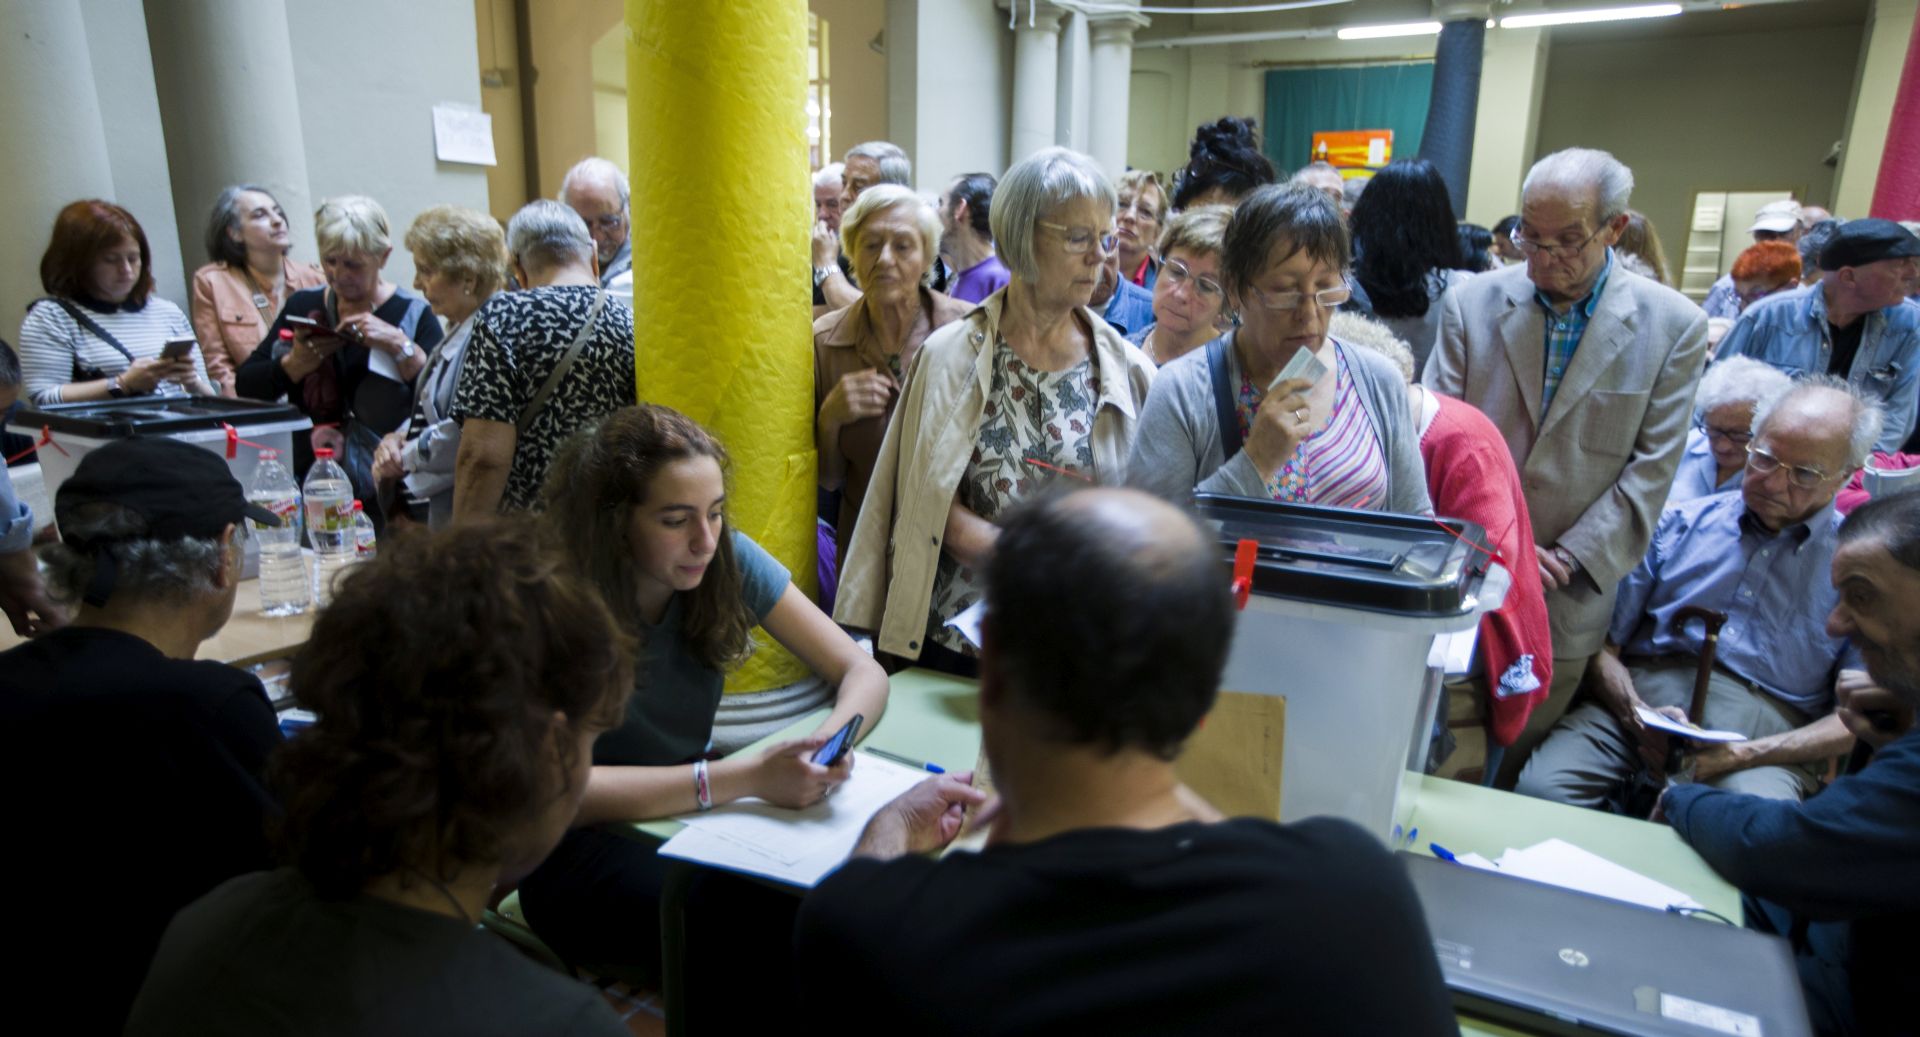 epa06237914 Election officials use cell phones to check voter registration lists as Catalonians wait to cast their vote in the Catalonian referendum, inside a school in Barcelona, Spain, 01 October 2017. Catalonia is holding an independence referendum which has been declared illegal by the Spanish Constitutional Court.  EPA/JIM HOLLANDER